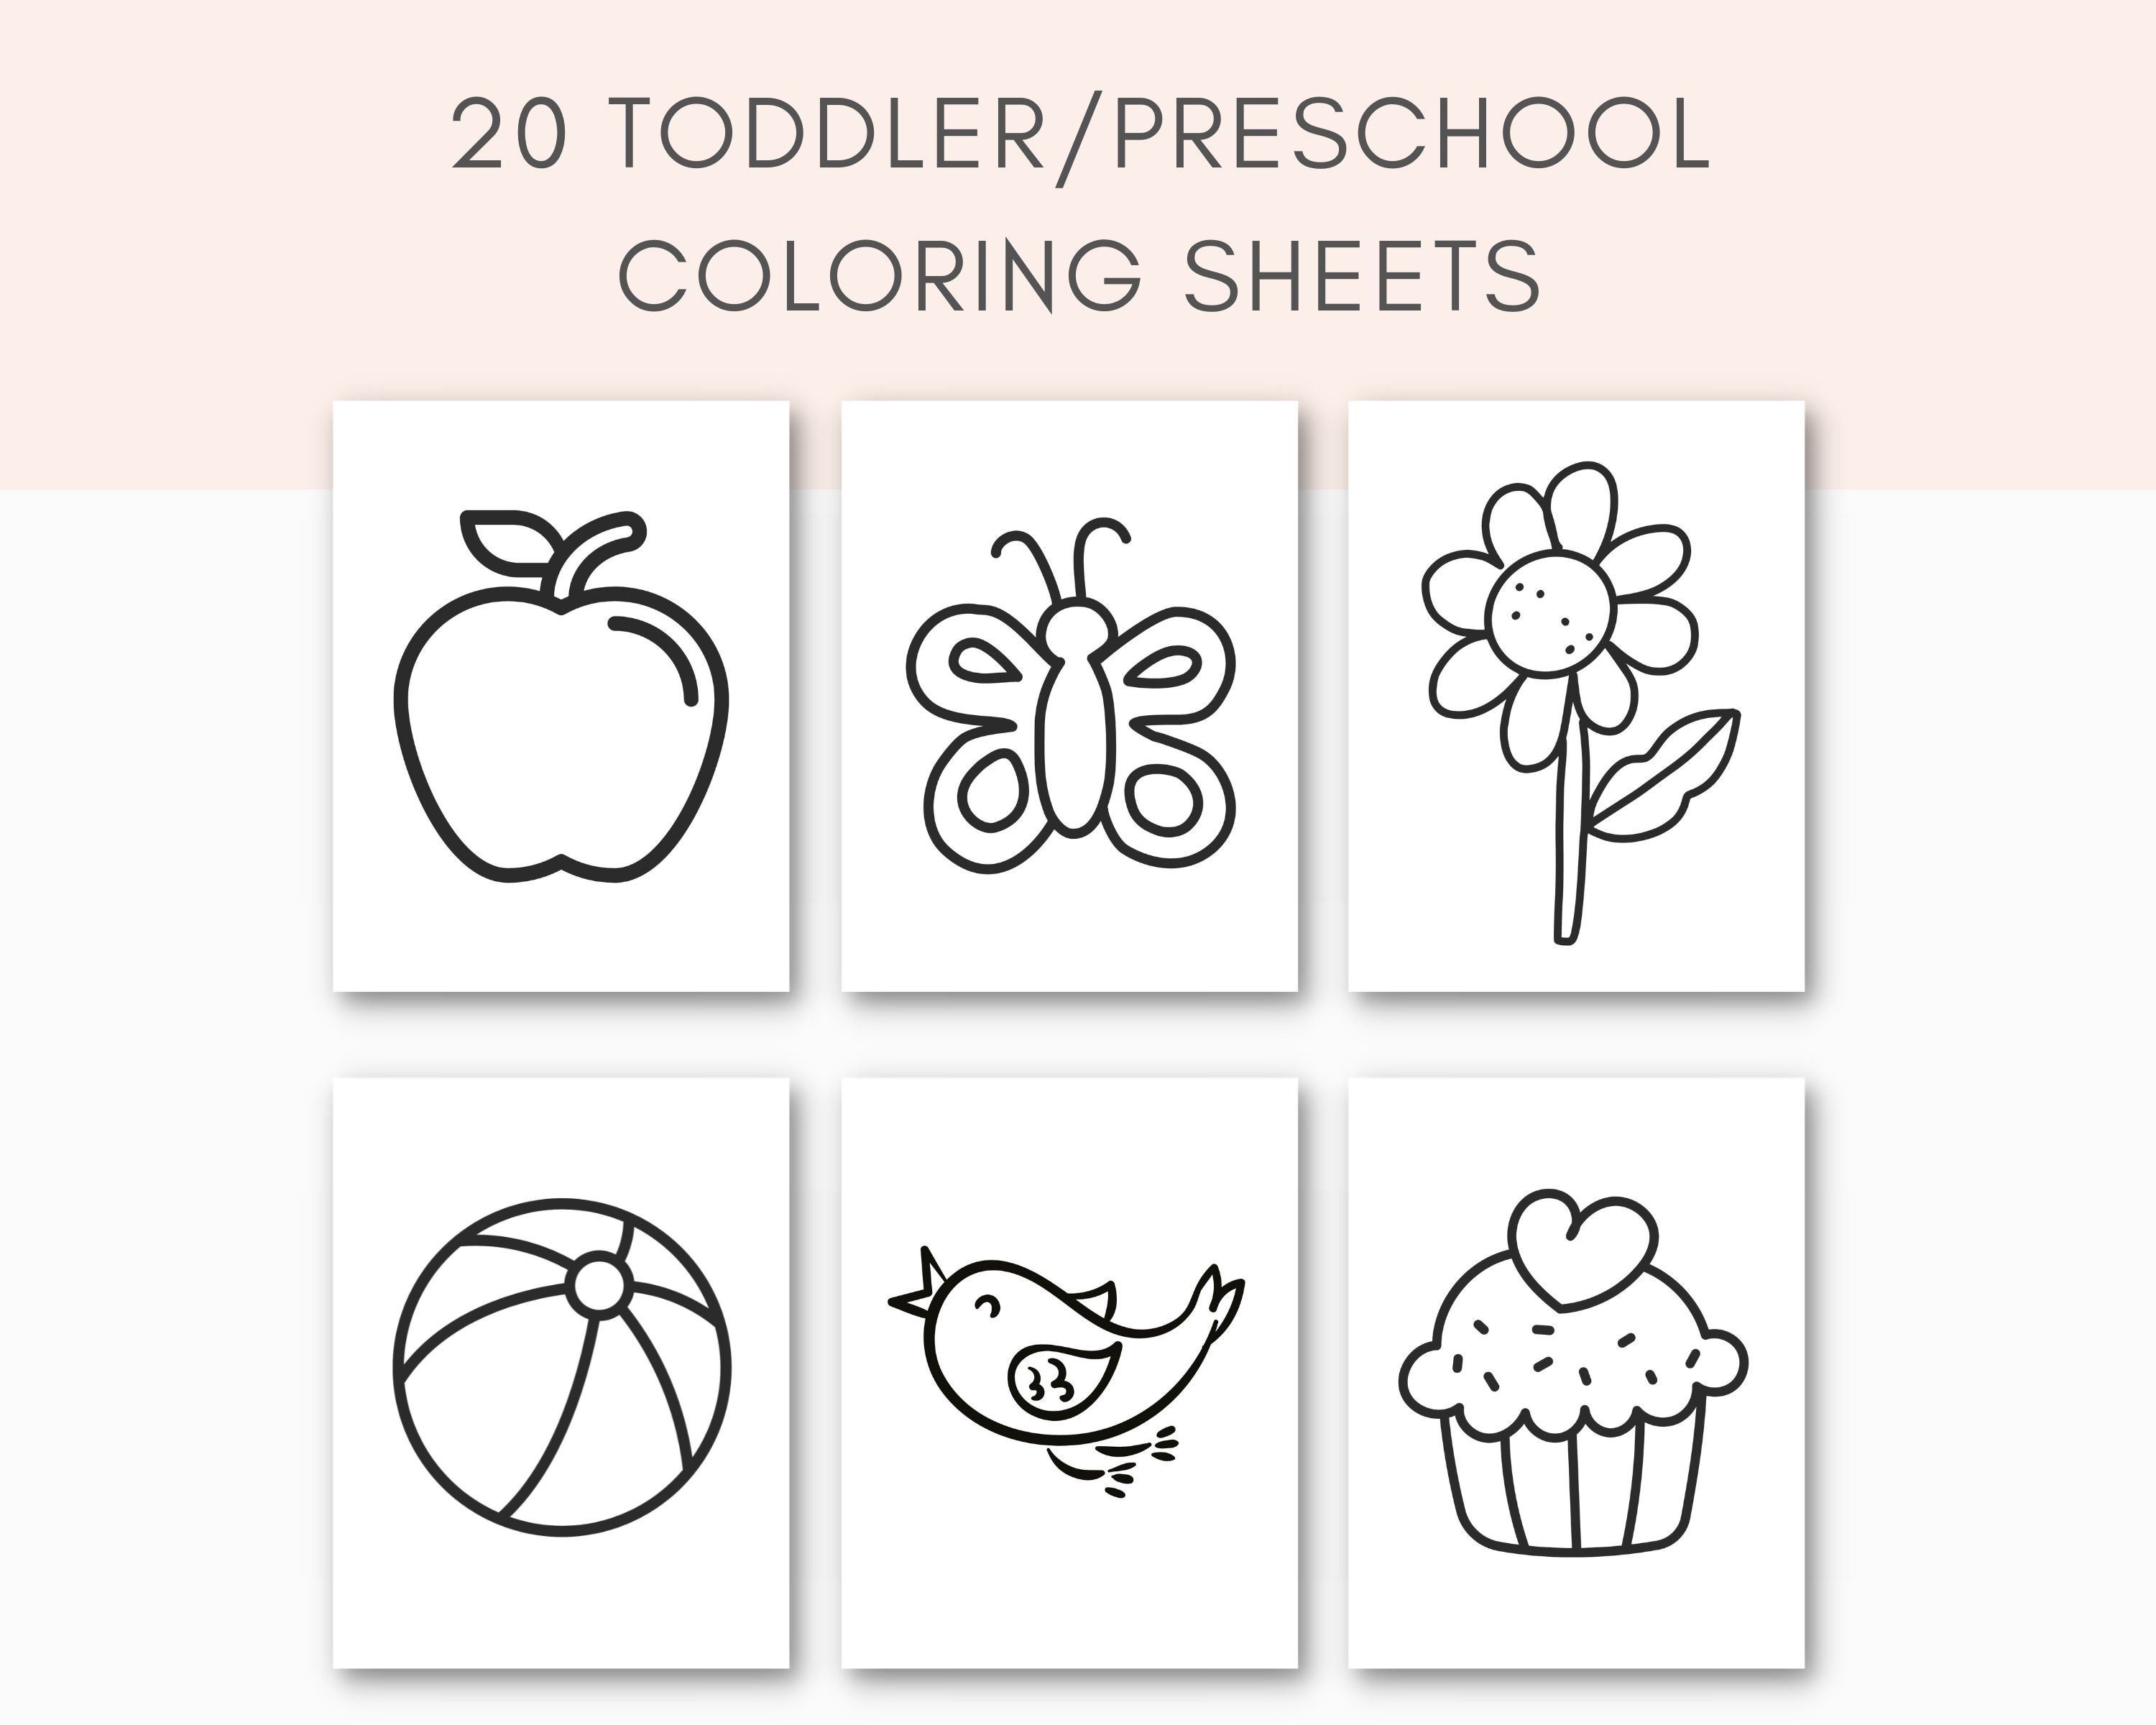 Coloring Pages Printable Boys Love Friends Set 033 